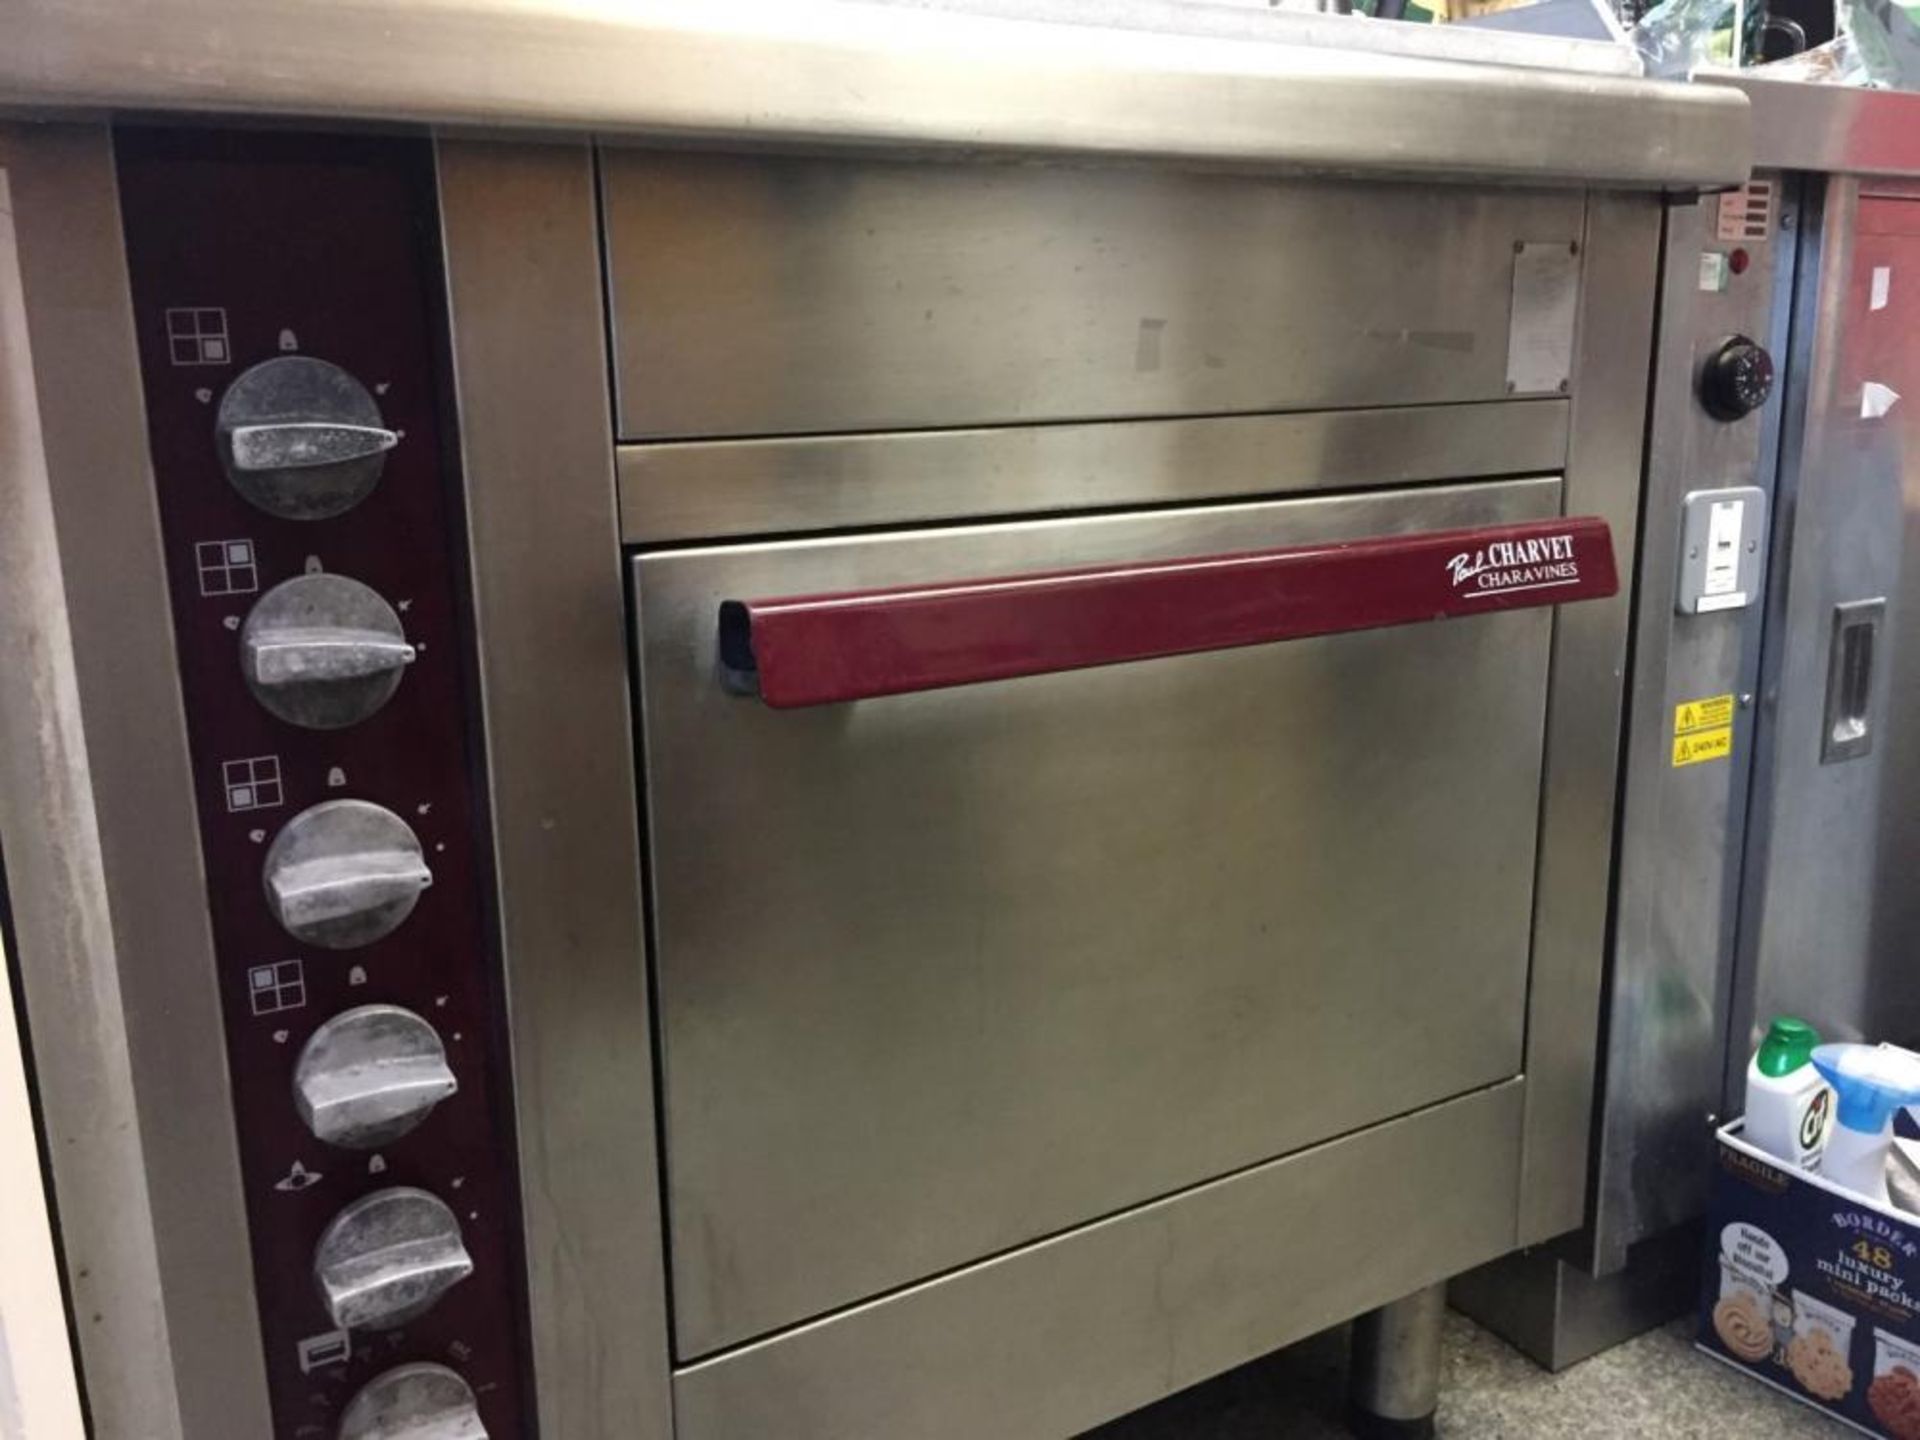 1 x Paul Charvet Charavines Heavy Duty Commercial Oven - Model: Pro 800 - Stainless Steel - Dimensio